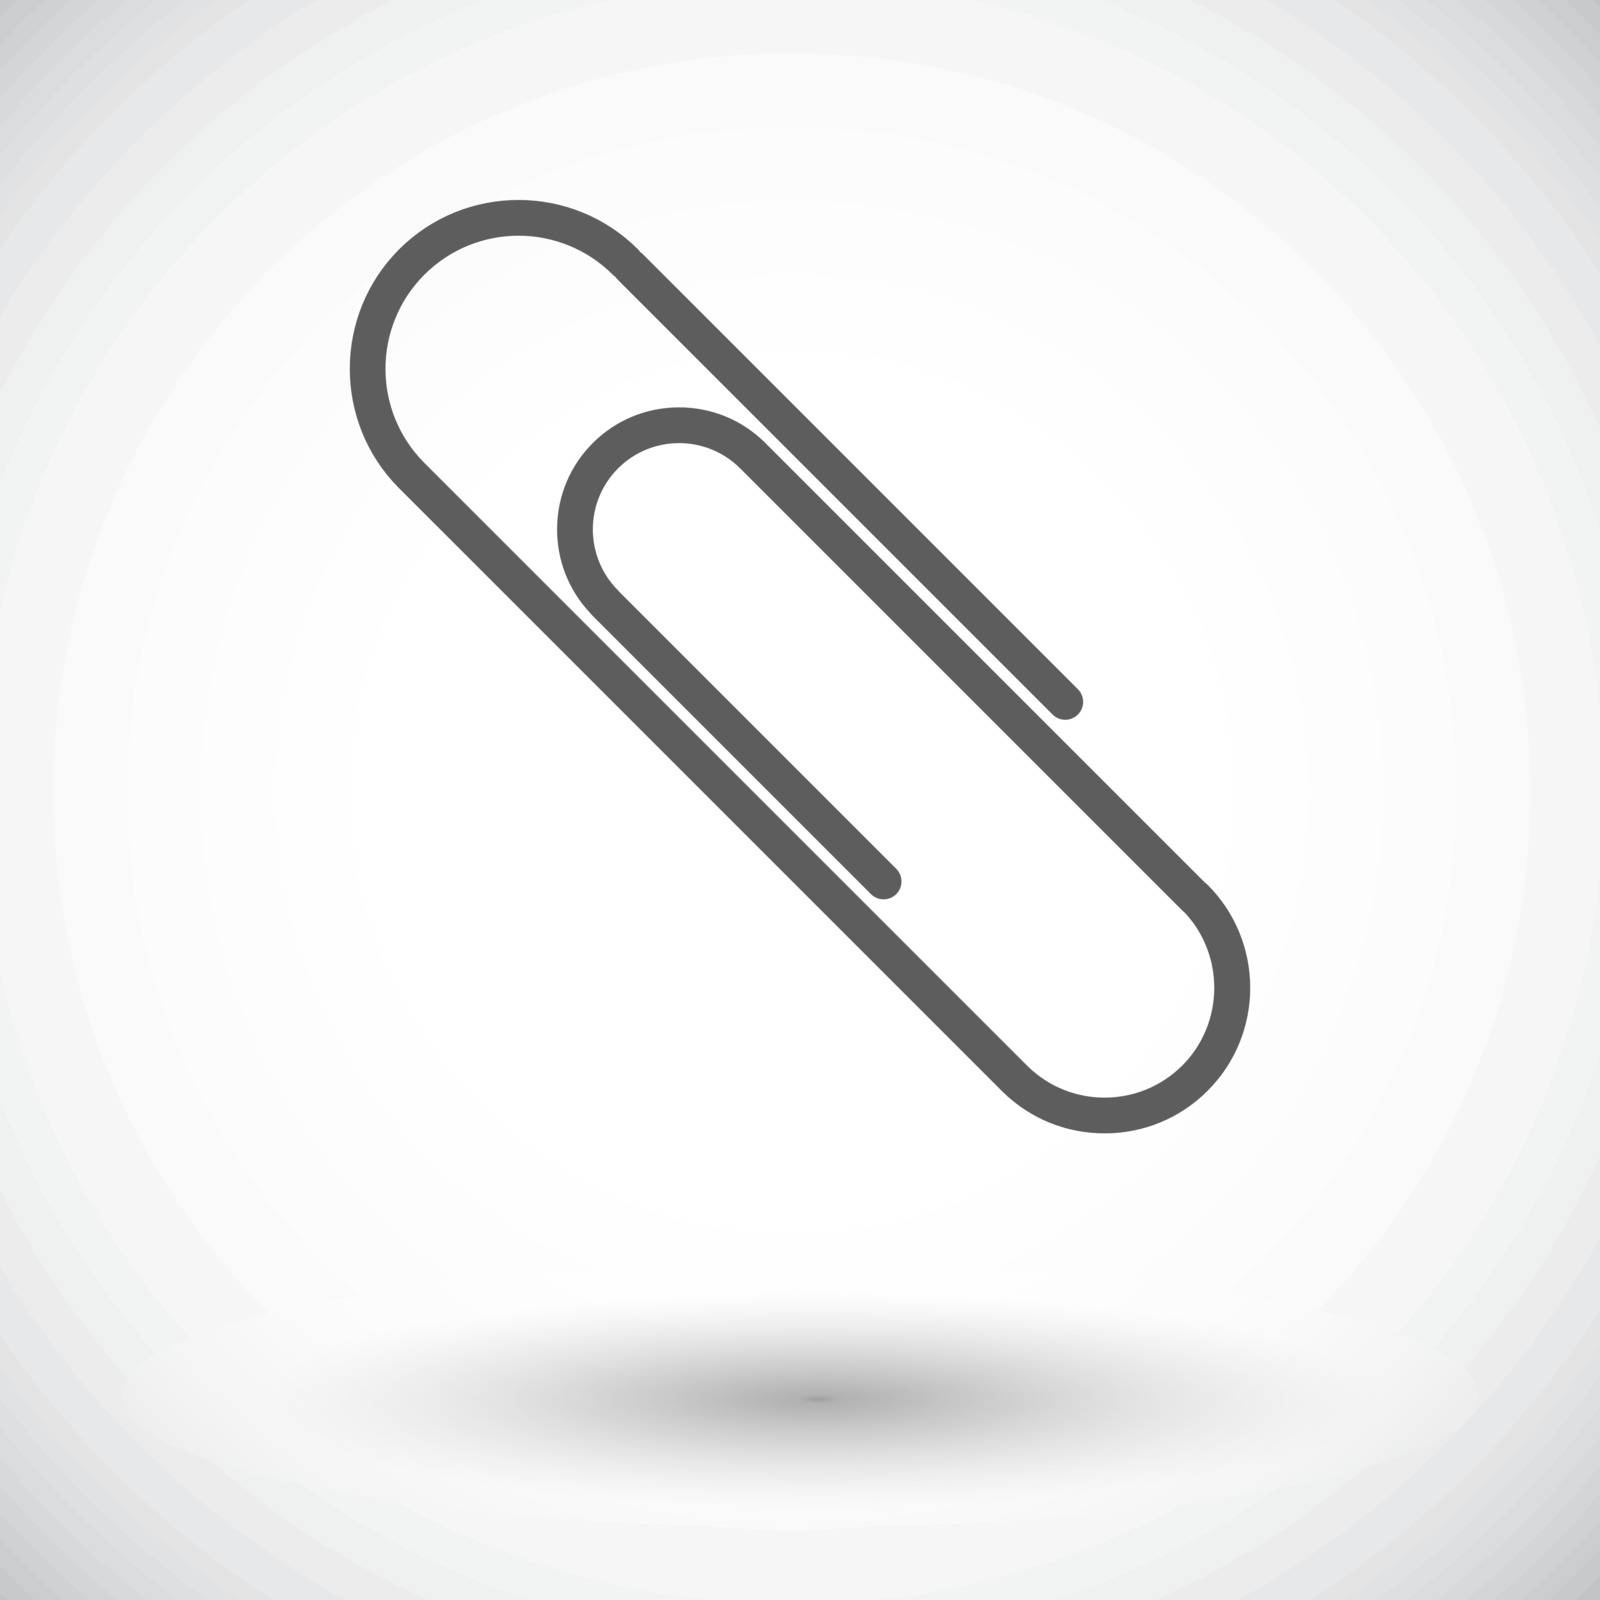 Clip. Single flat icon on white background. Vector illustration.